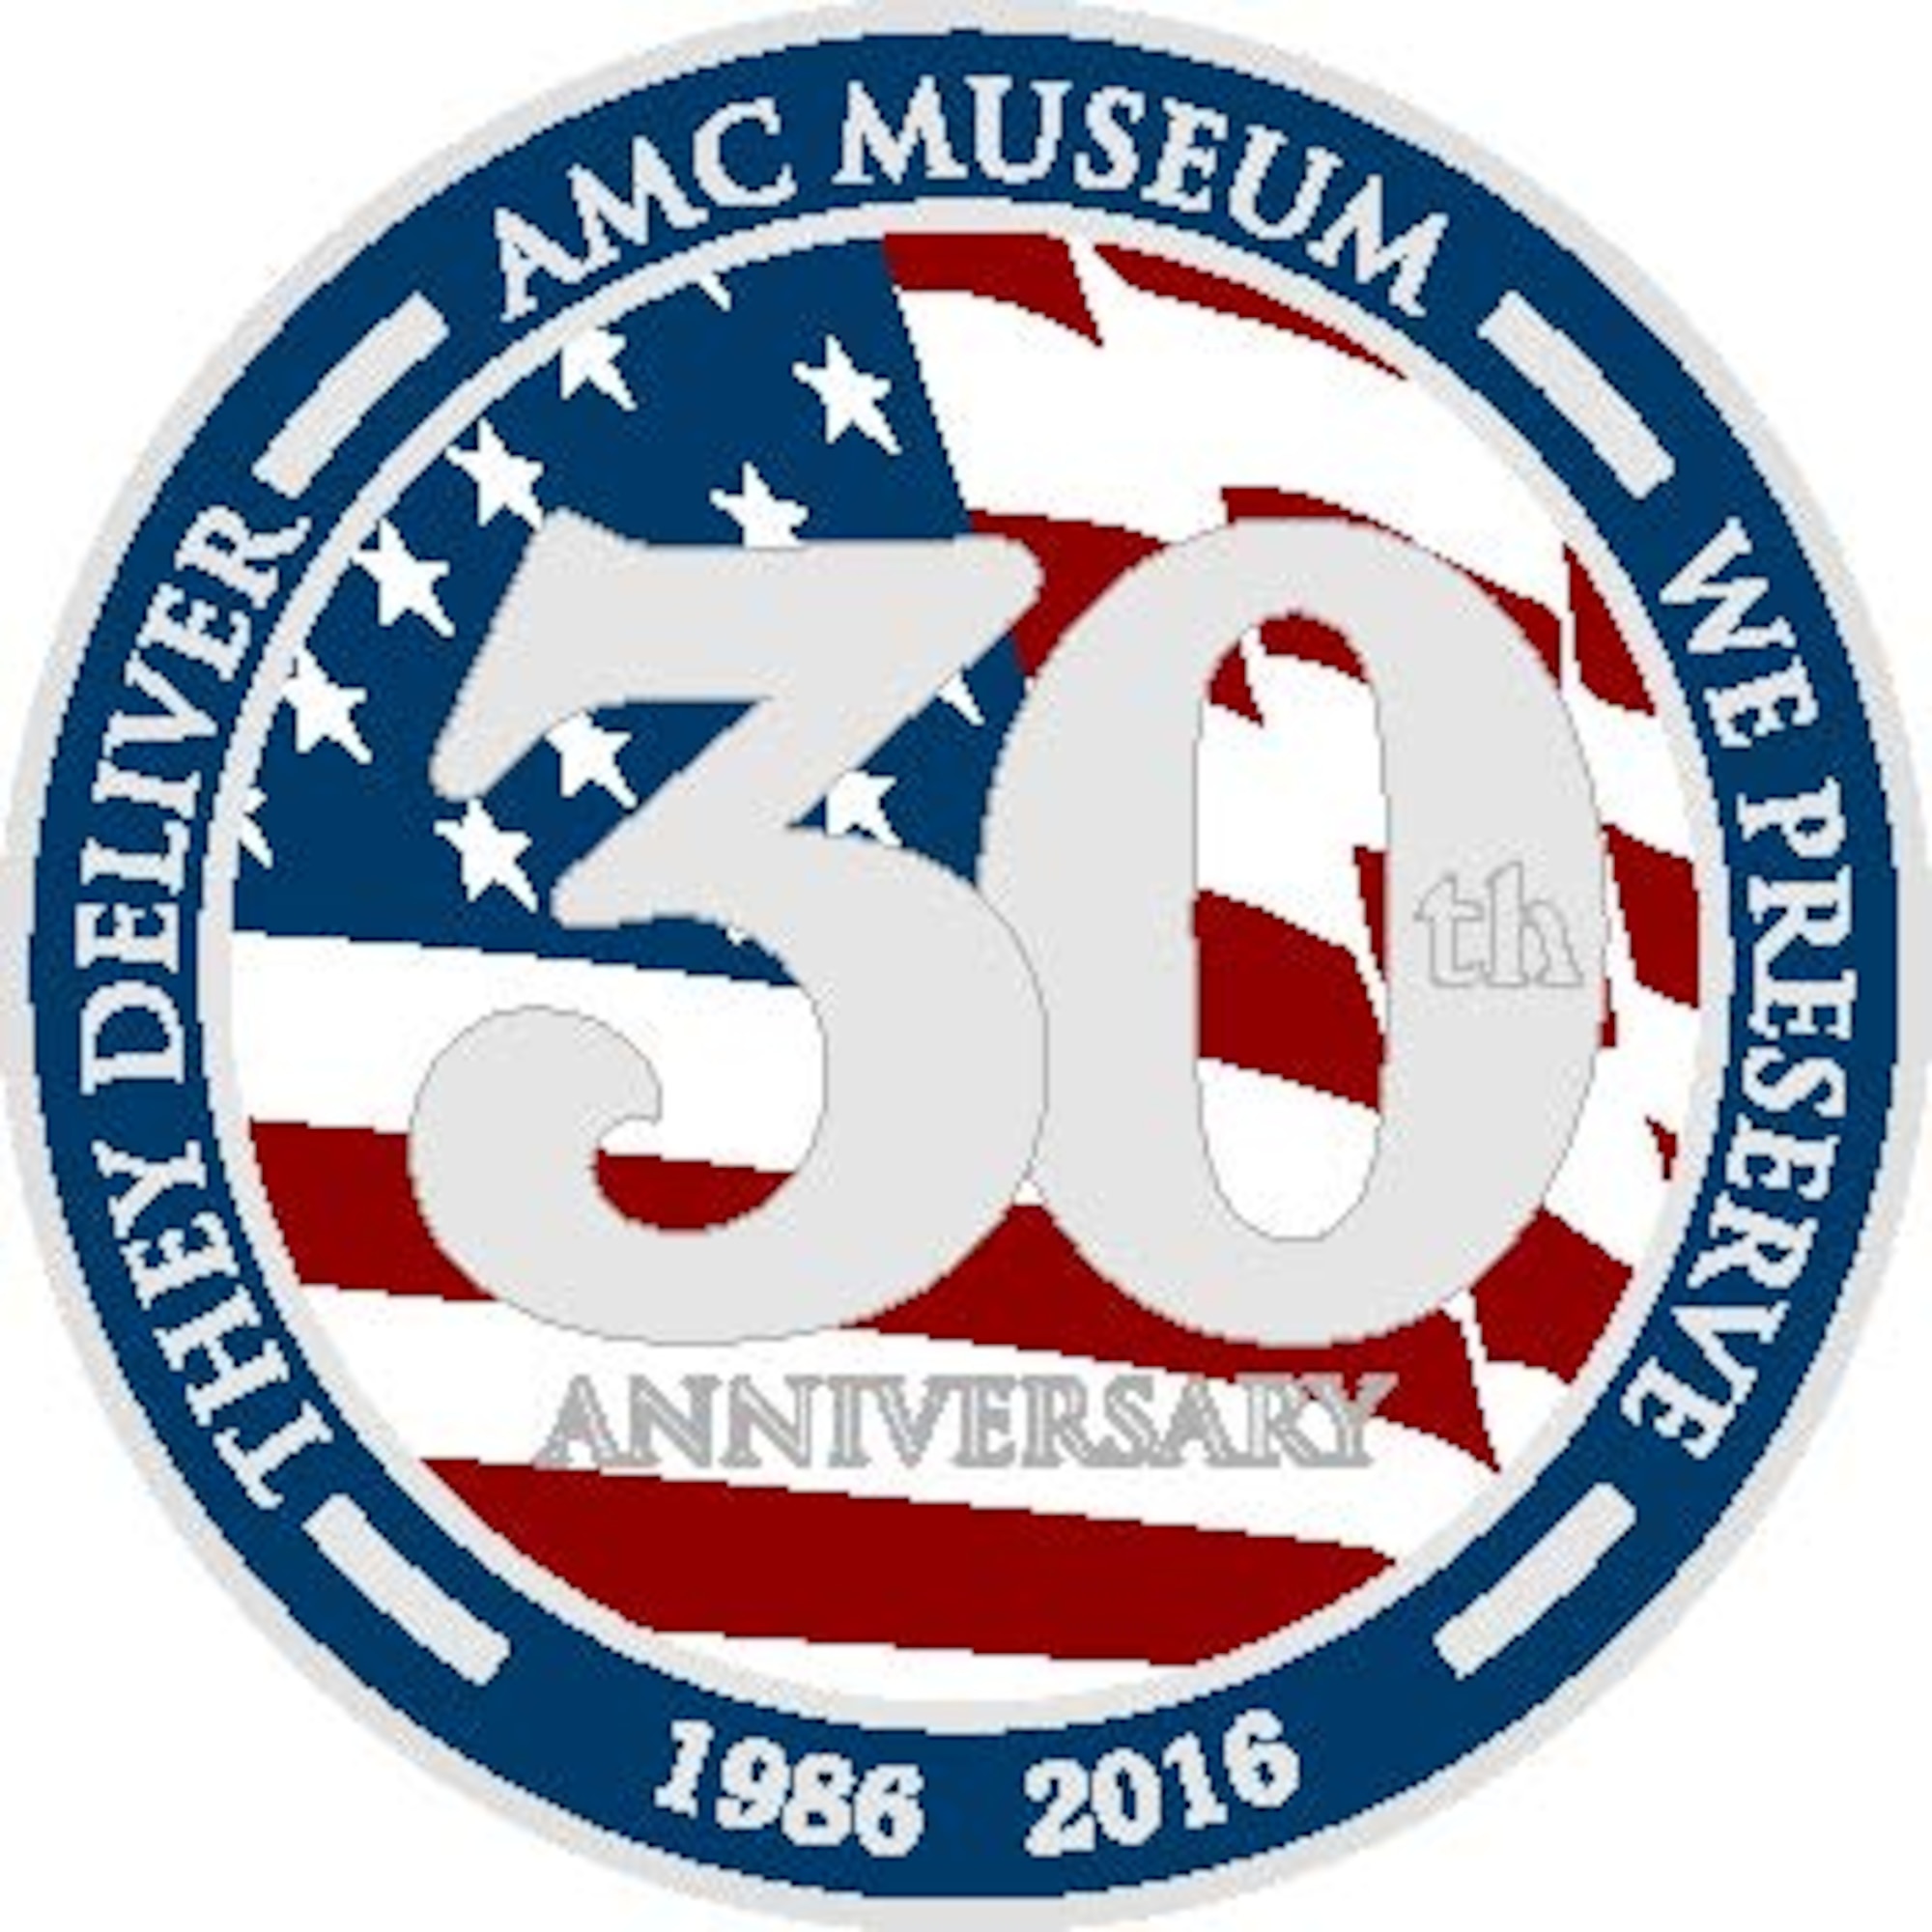 The Air Mobility Command Museum celebrated its 30th Anniversary during the Festival of Flight Sept. 22-24, 2016. The primary mission of the AMC Museum is to collect, preserve and exhibit the artifacts and human stories significant to the development and employment of military airlift and refueling in the U.S. Air Force and the U.S. Army Air Force. (Courtesy graphic)